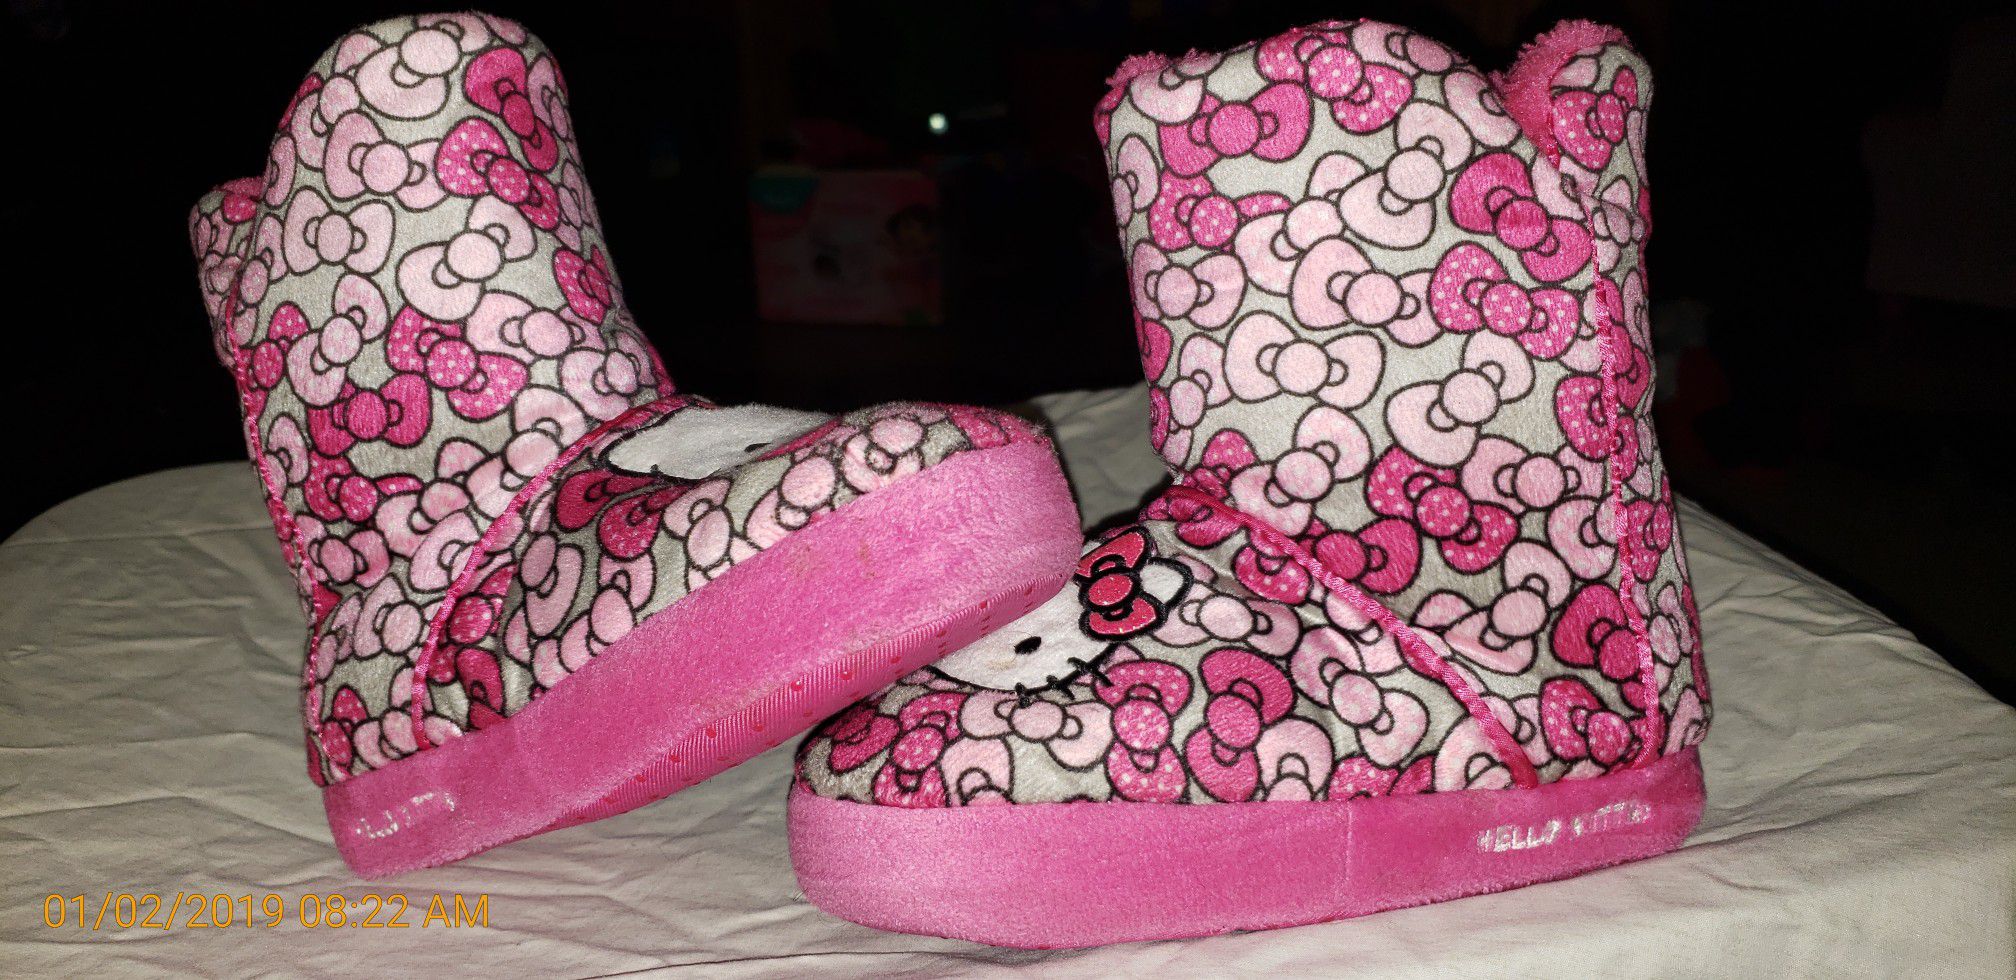 SIZE 13/1 Toddler Hello Kitty Slippers Excellent Used Condition. Daughter doesn't like wearing anything on her feet, So maybe worn a total of 10mins.